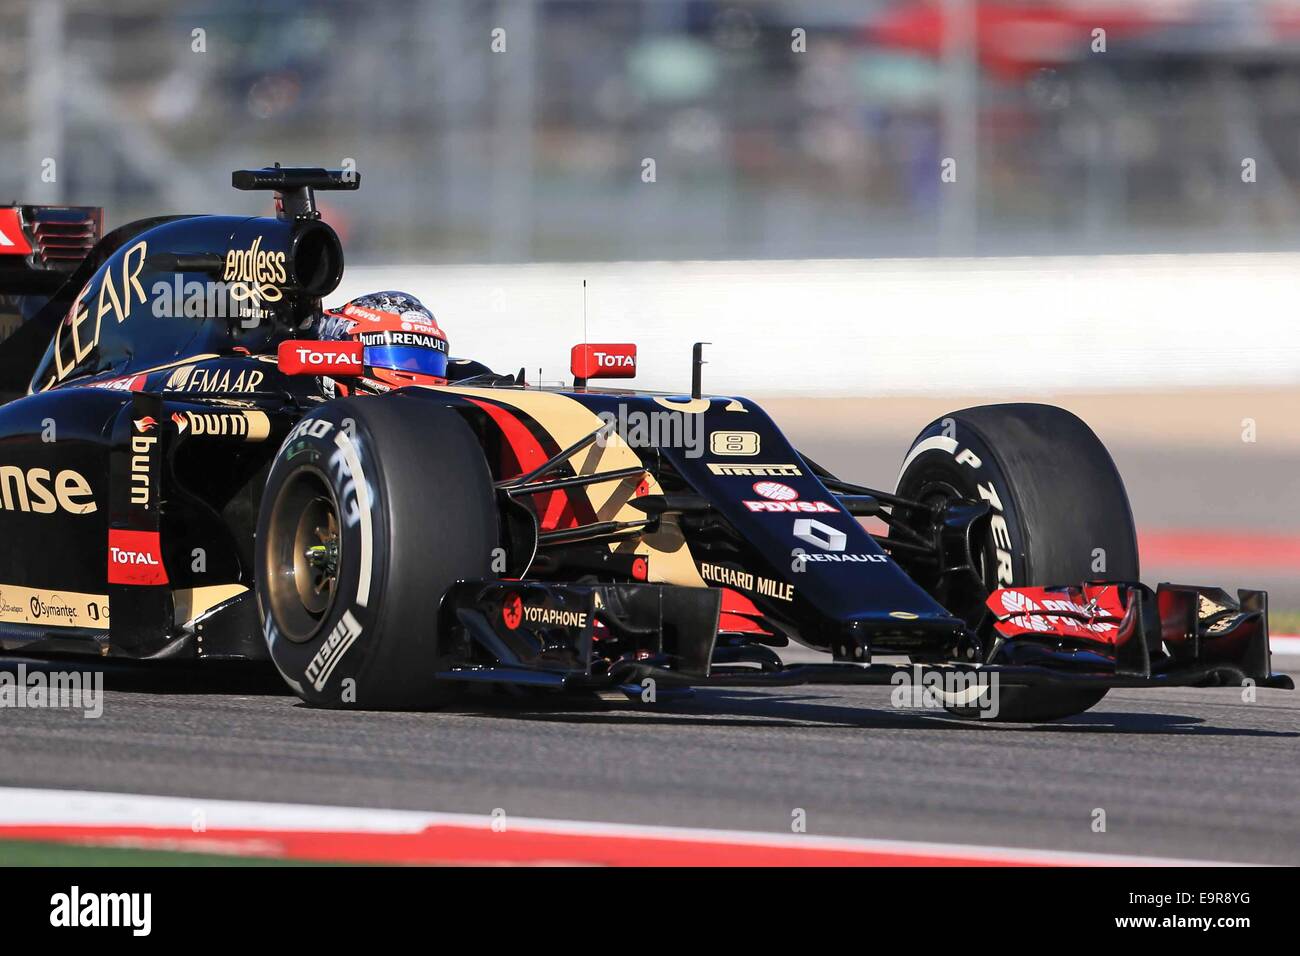 Austin, Texas, USA. 31st Oct, 2014. F1 Grand Prix of America, practise and  inpsection day. Lotus F1 Team E22 driver Romain Grosjean runs during  Practice 1 with a new nose Credit: Action